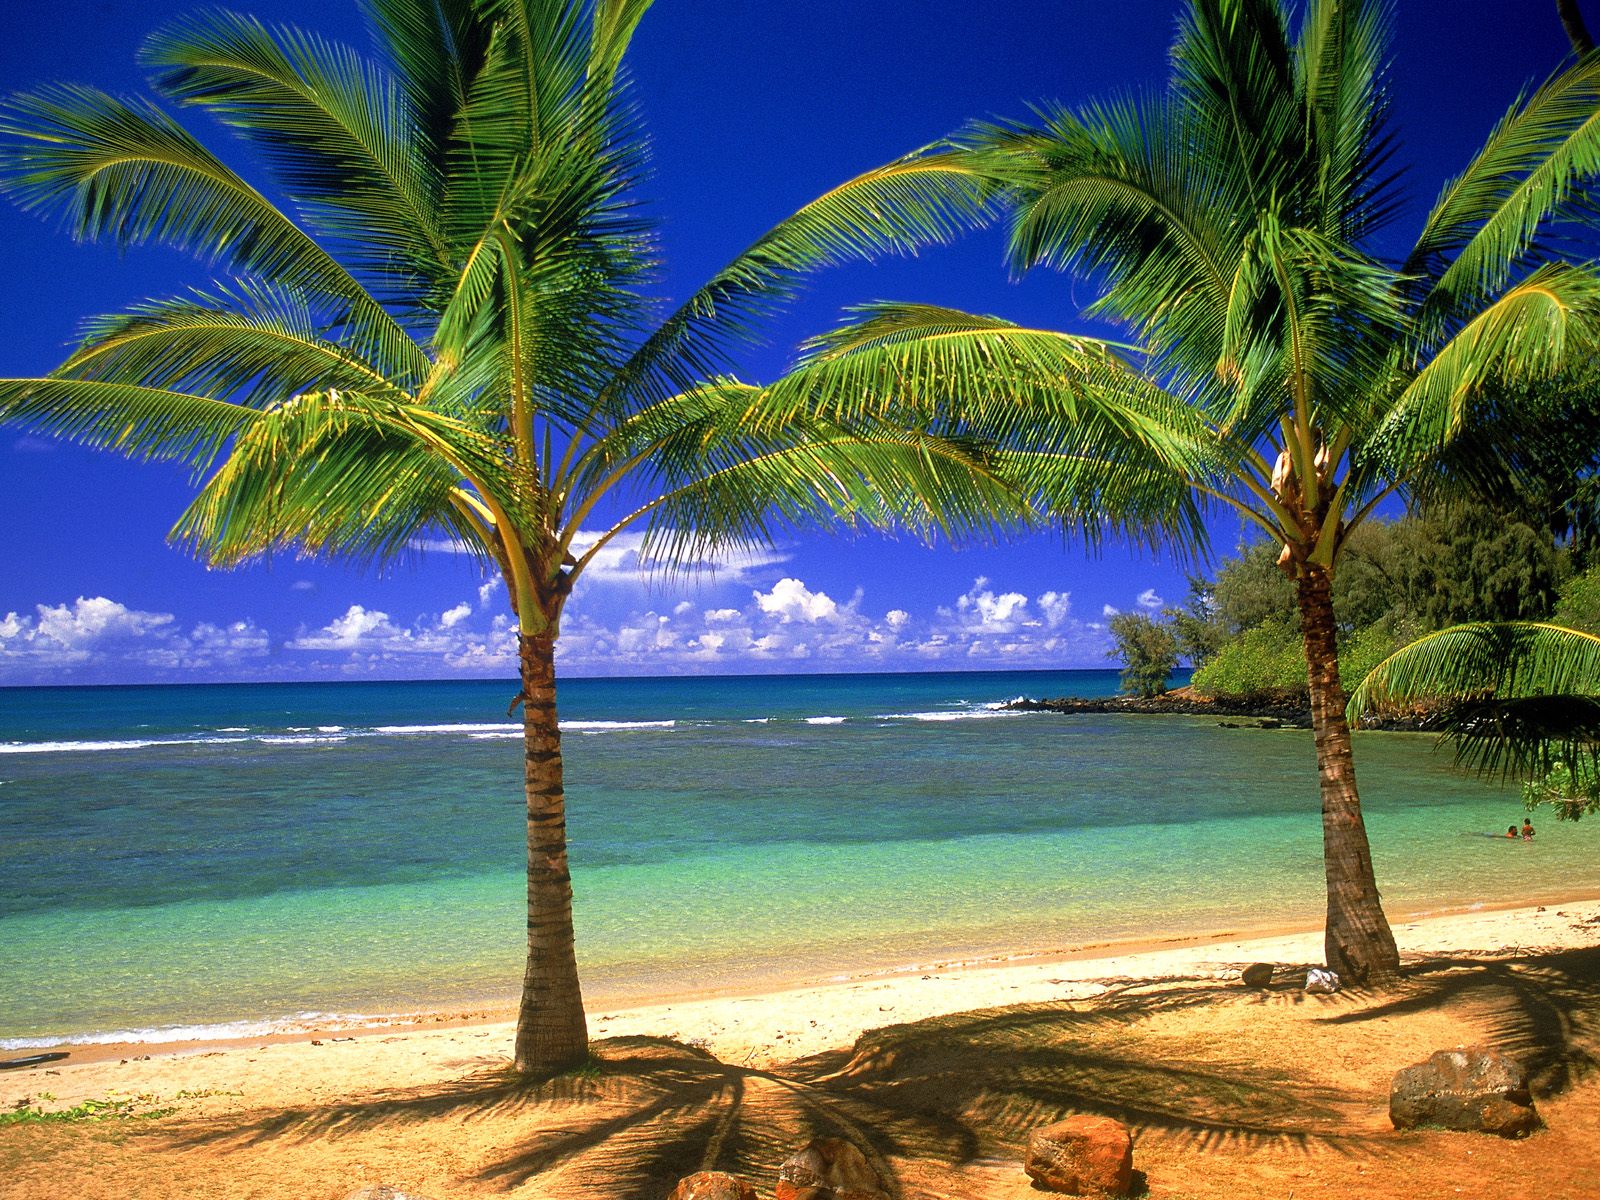 Wallppaer Of Beautiful Scenery In Tropical Lagoon Click To